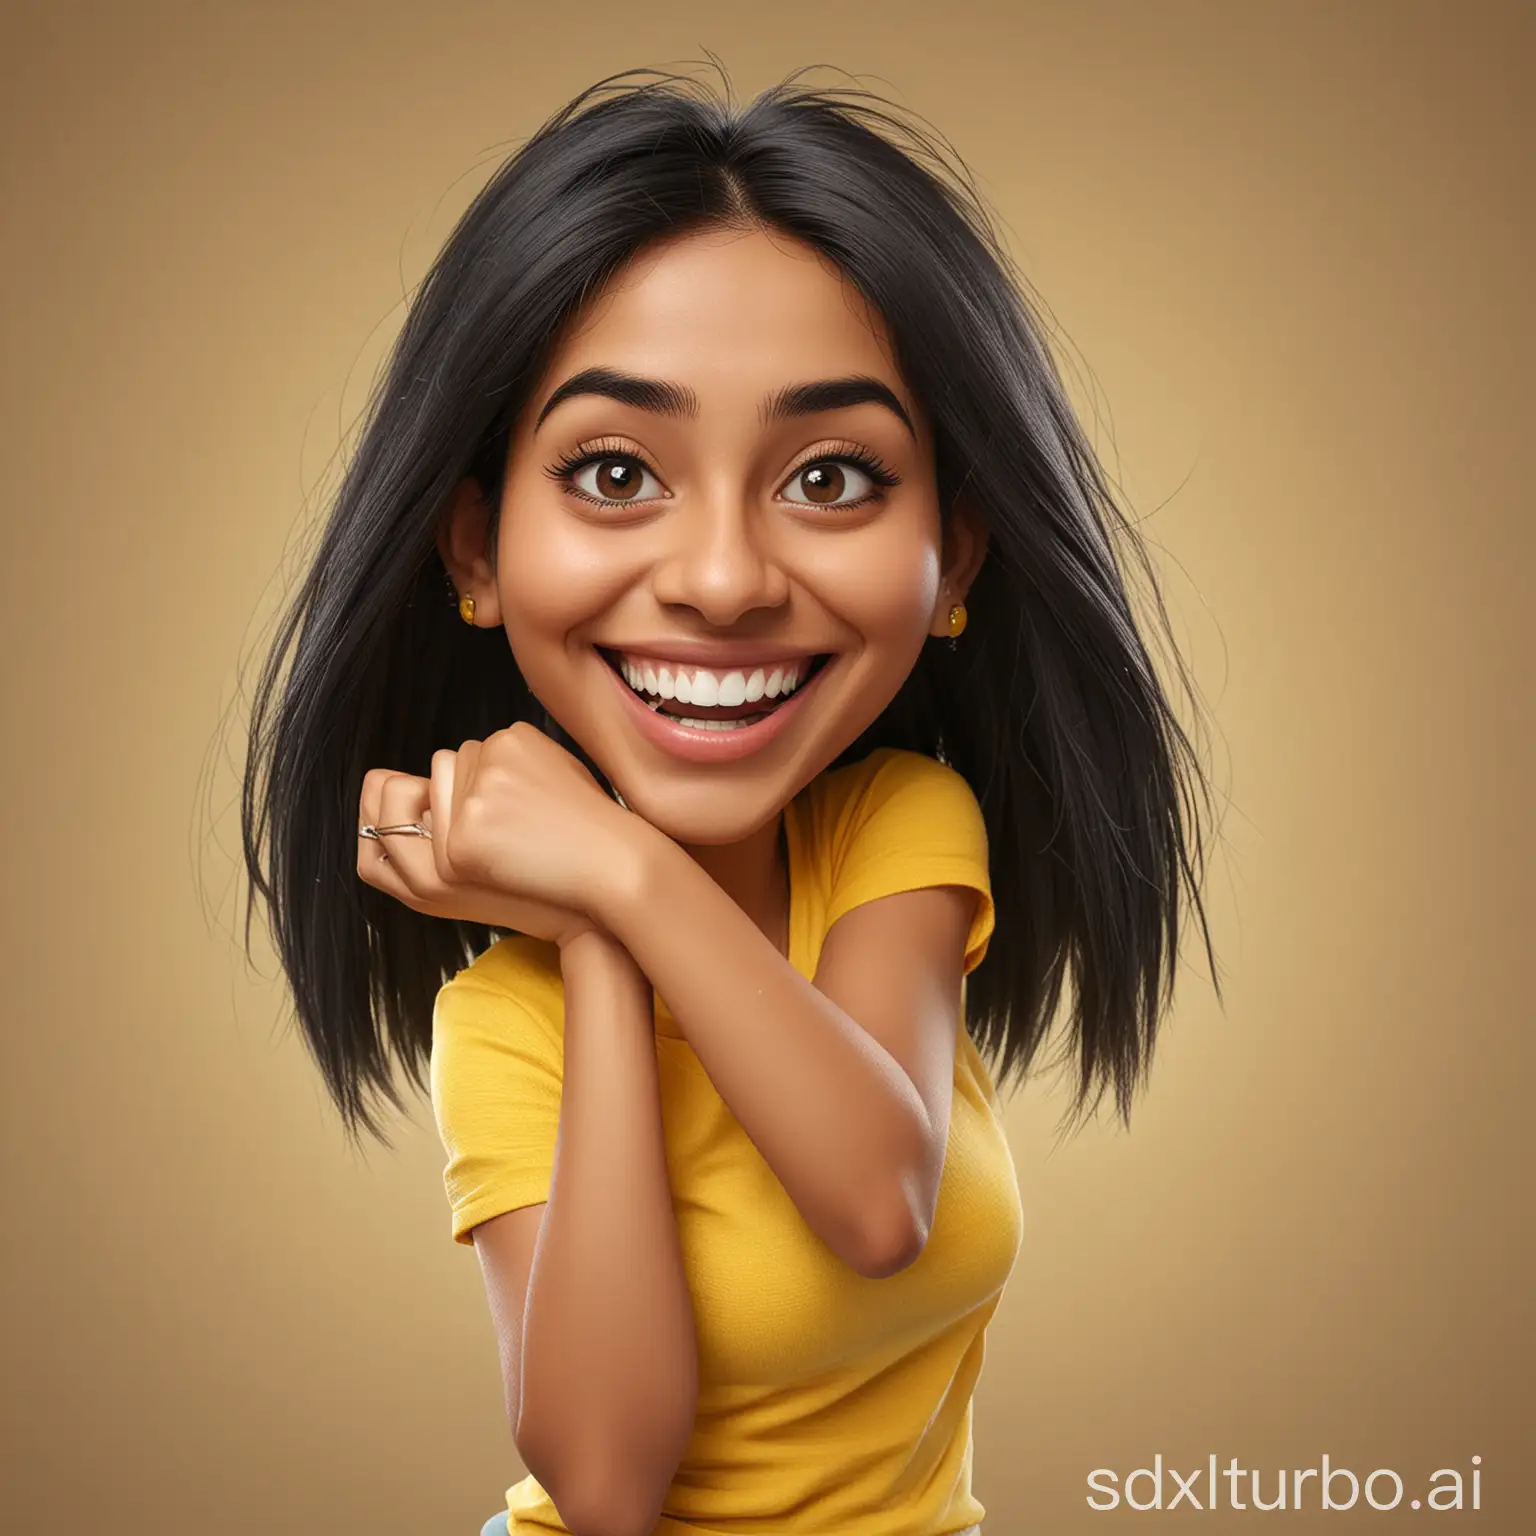 Cheerful-Young-Indian-Woman-with-Broad-Smile-and-Blurred-Background